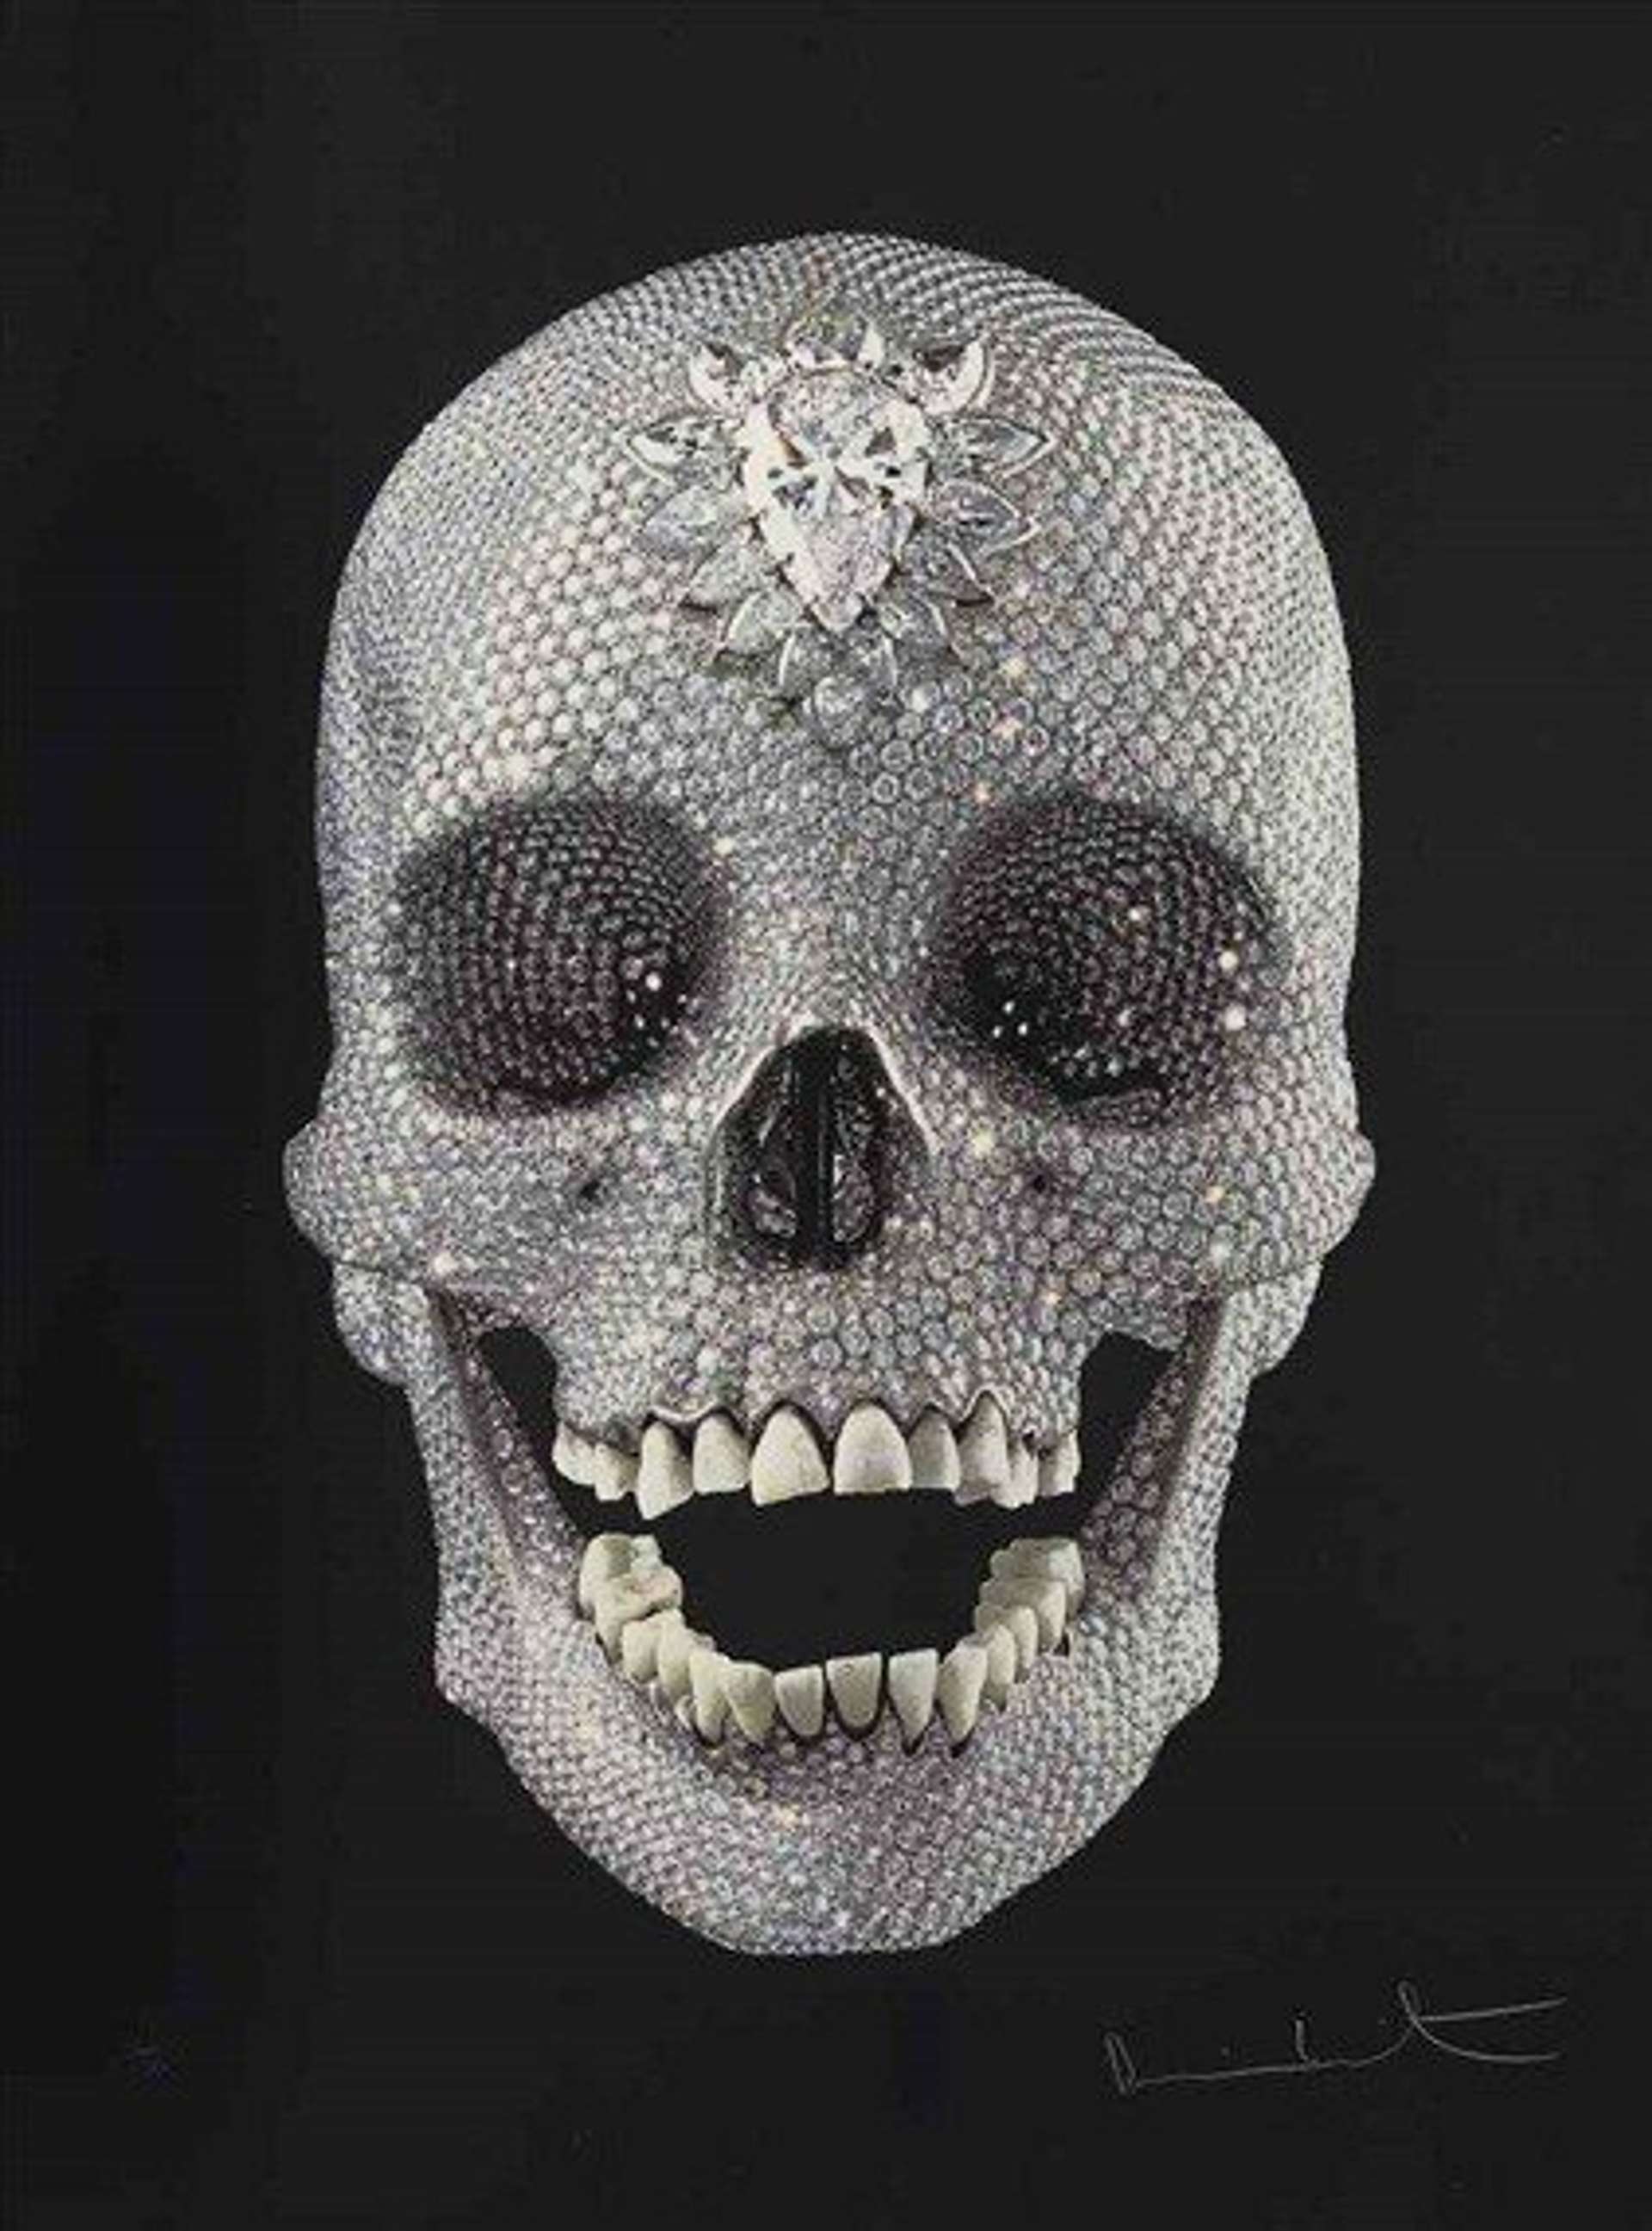 A diamond encrusted skull gazes out to the viewer, set against a black background. Diamonds cover the entire skull, with one large diamond at the centre of its forehead, and real human teeth. The artist's signature is written in the bottom right corner of the screen print.